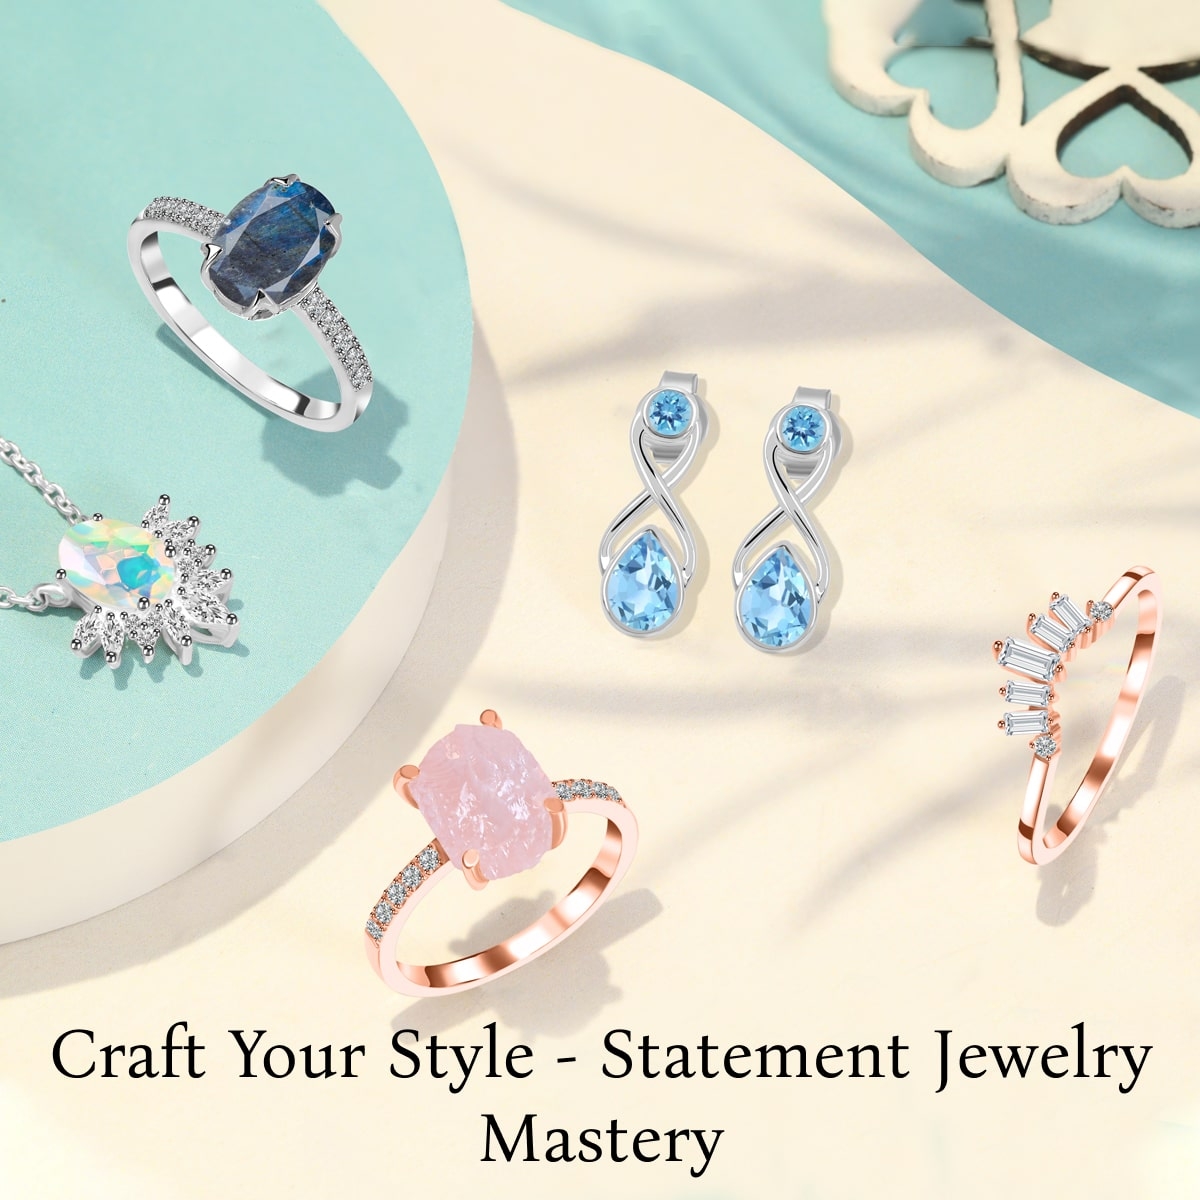 Tips and trick for styling your statement jewelry